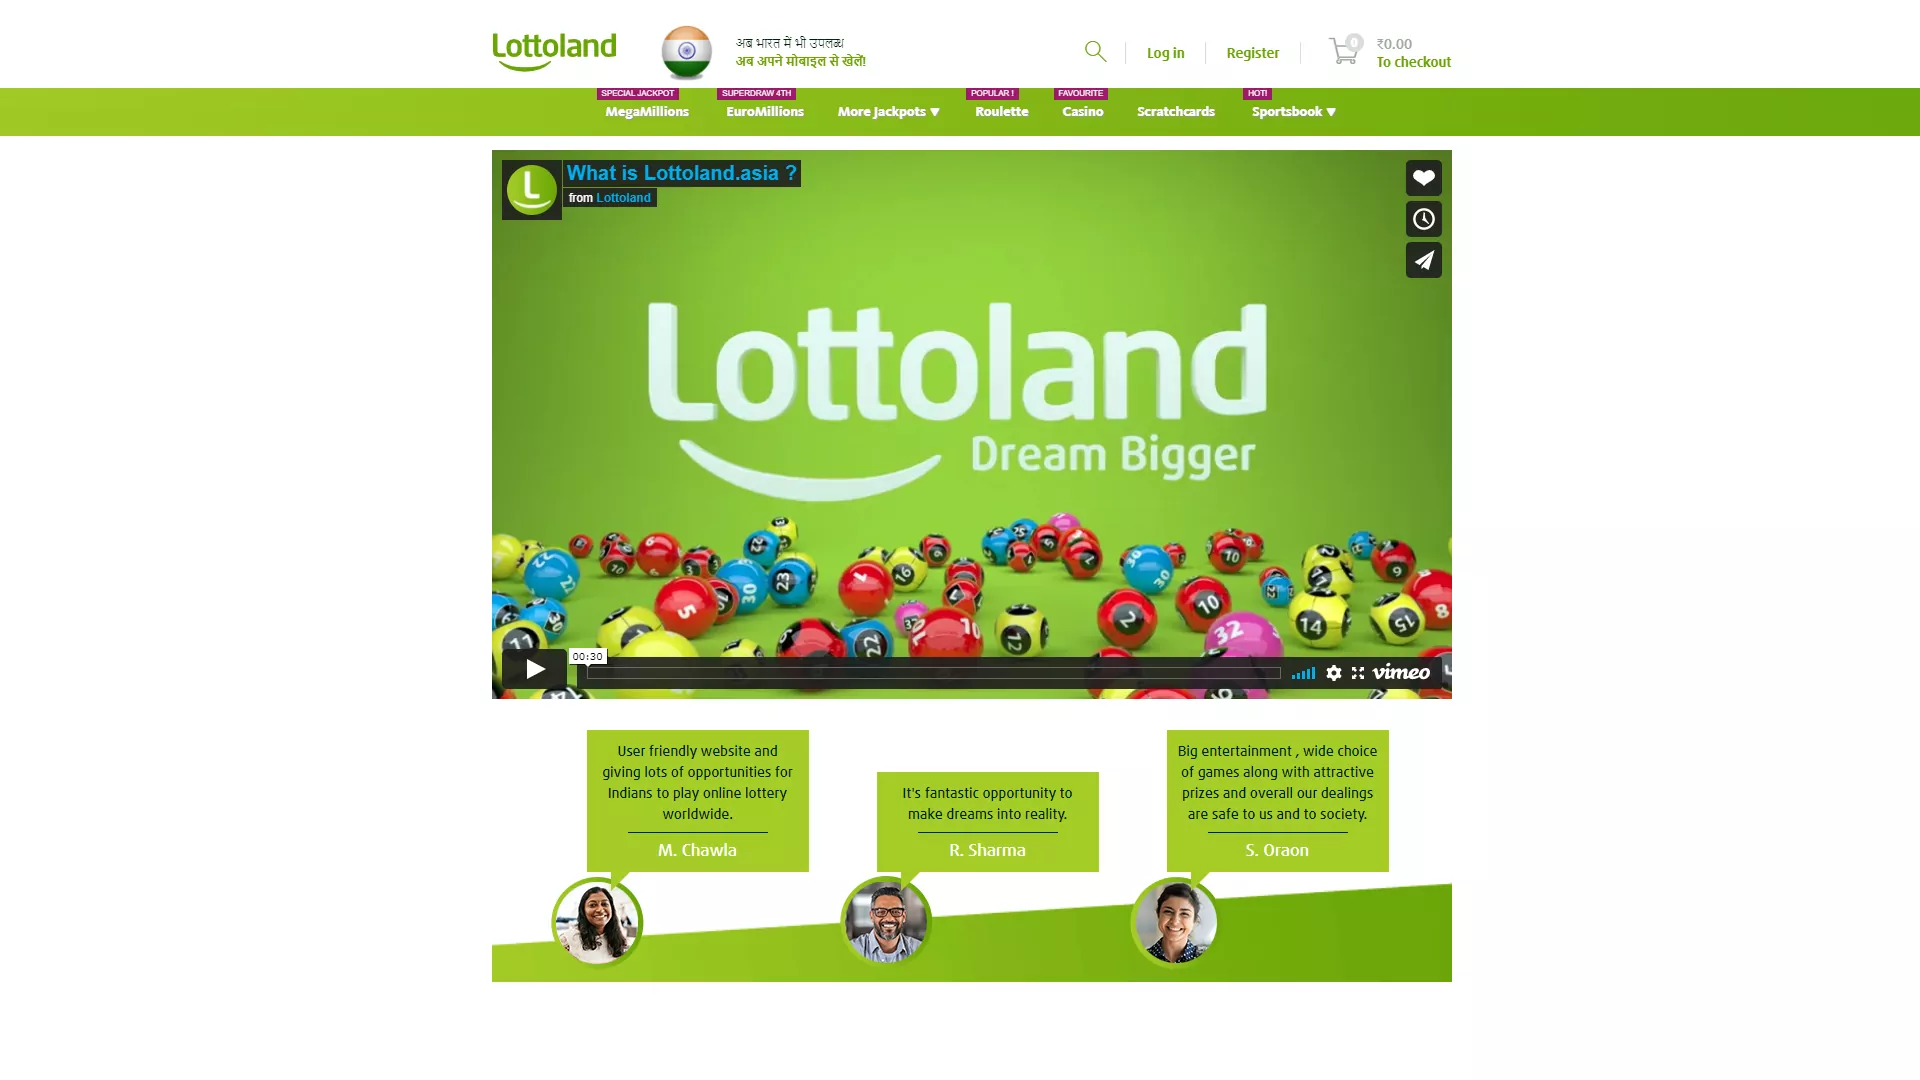 There is a special service Lottoland Asia for users from India.